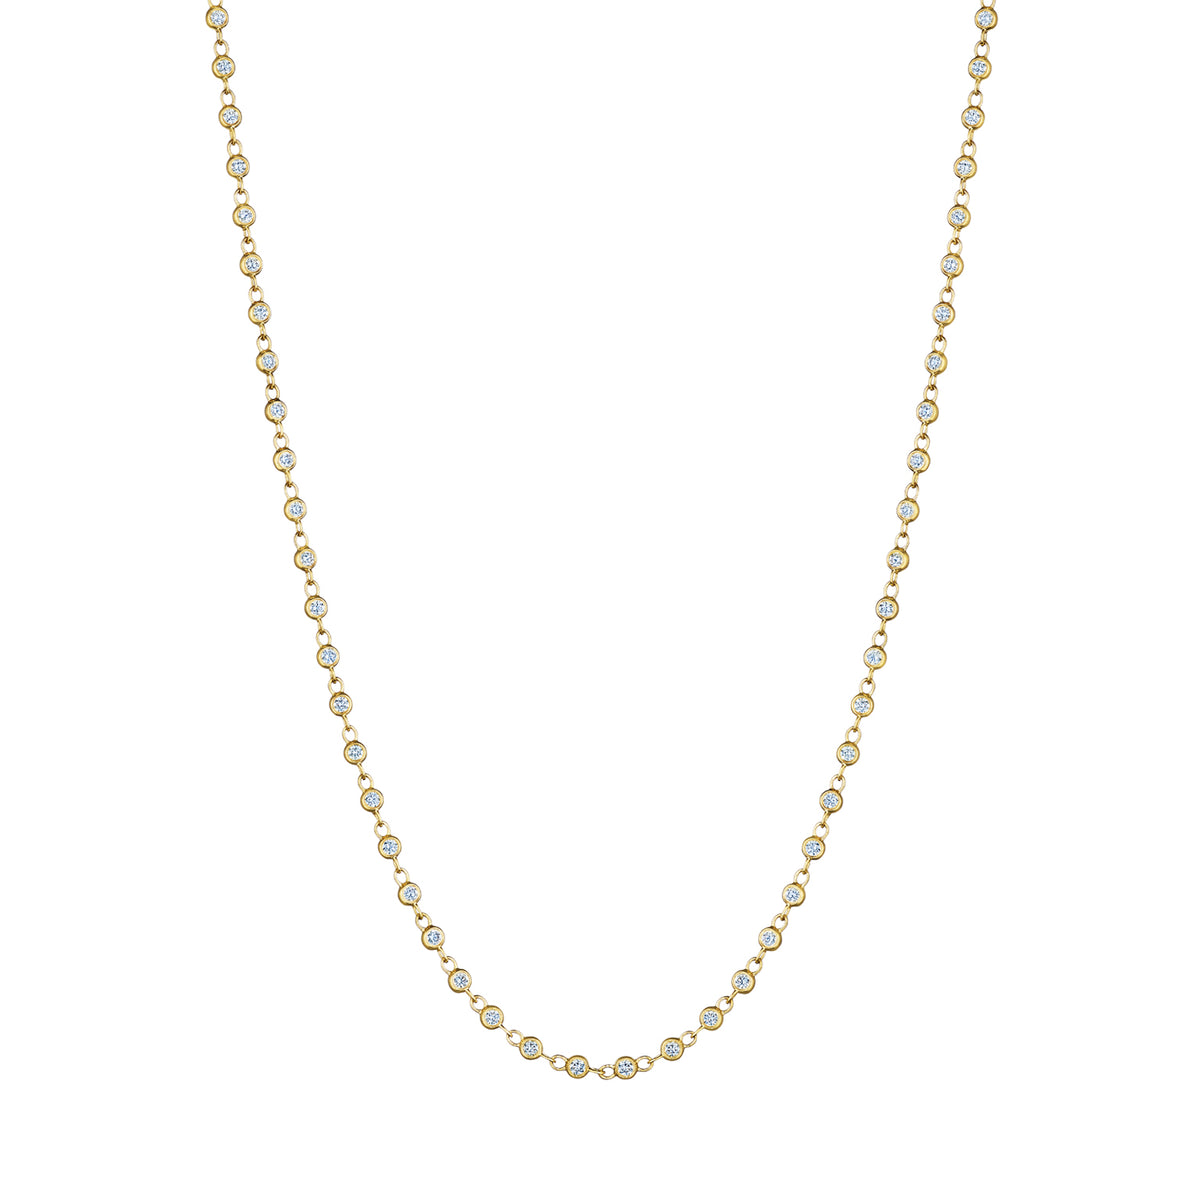 Golden Garland Necklace in Yellow Gold with Round Brilliant Diamonds